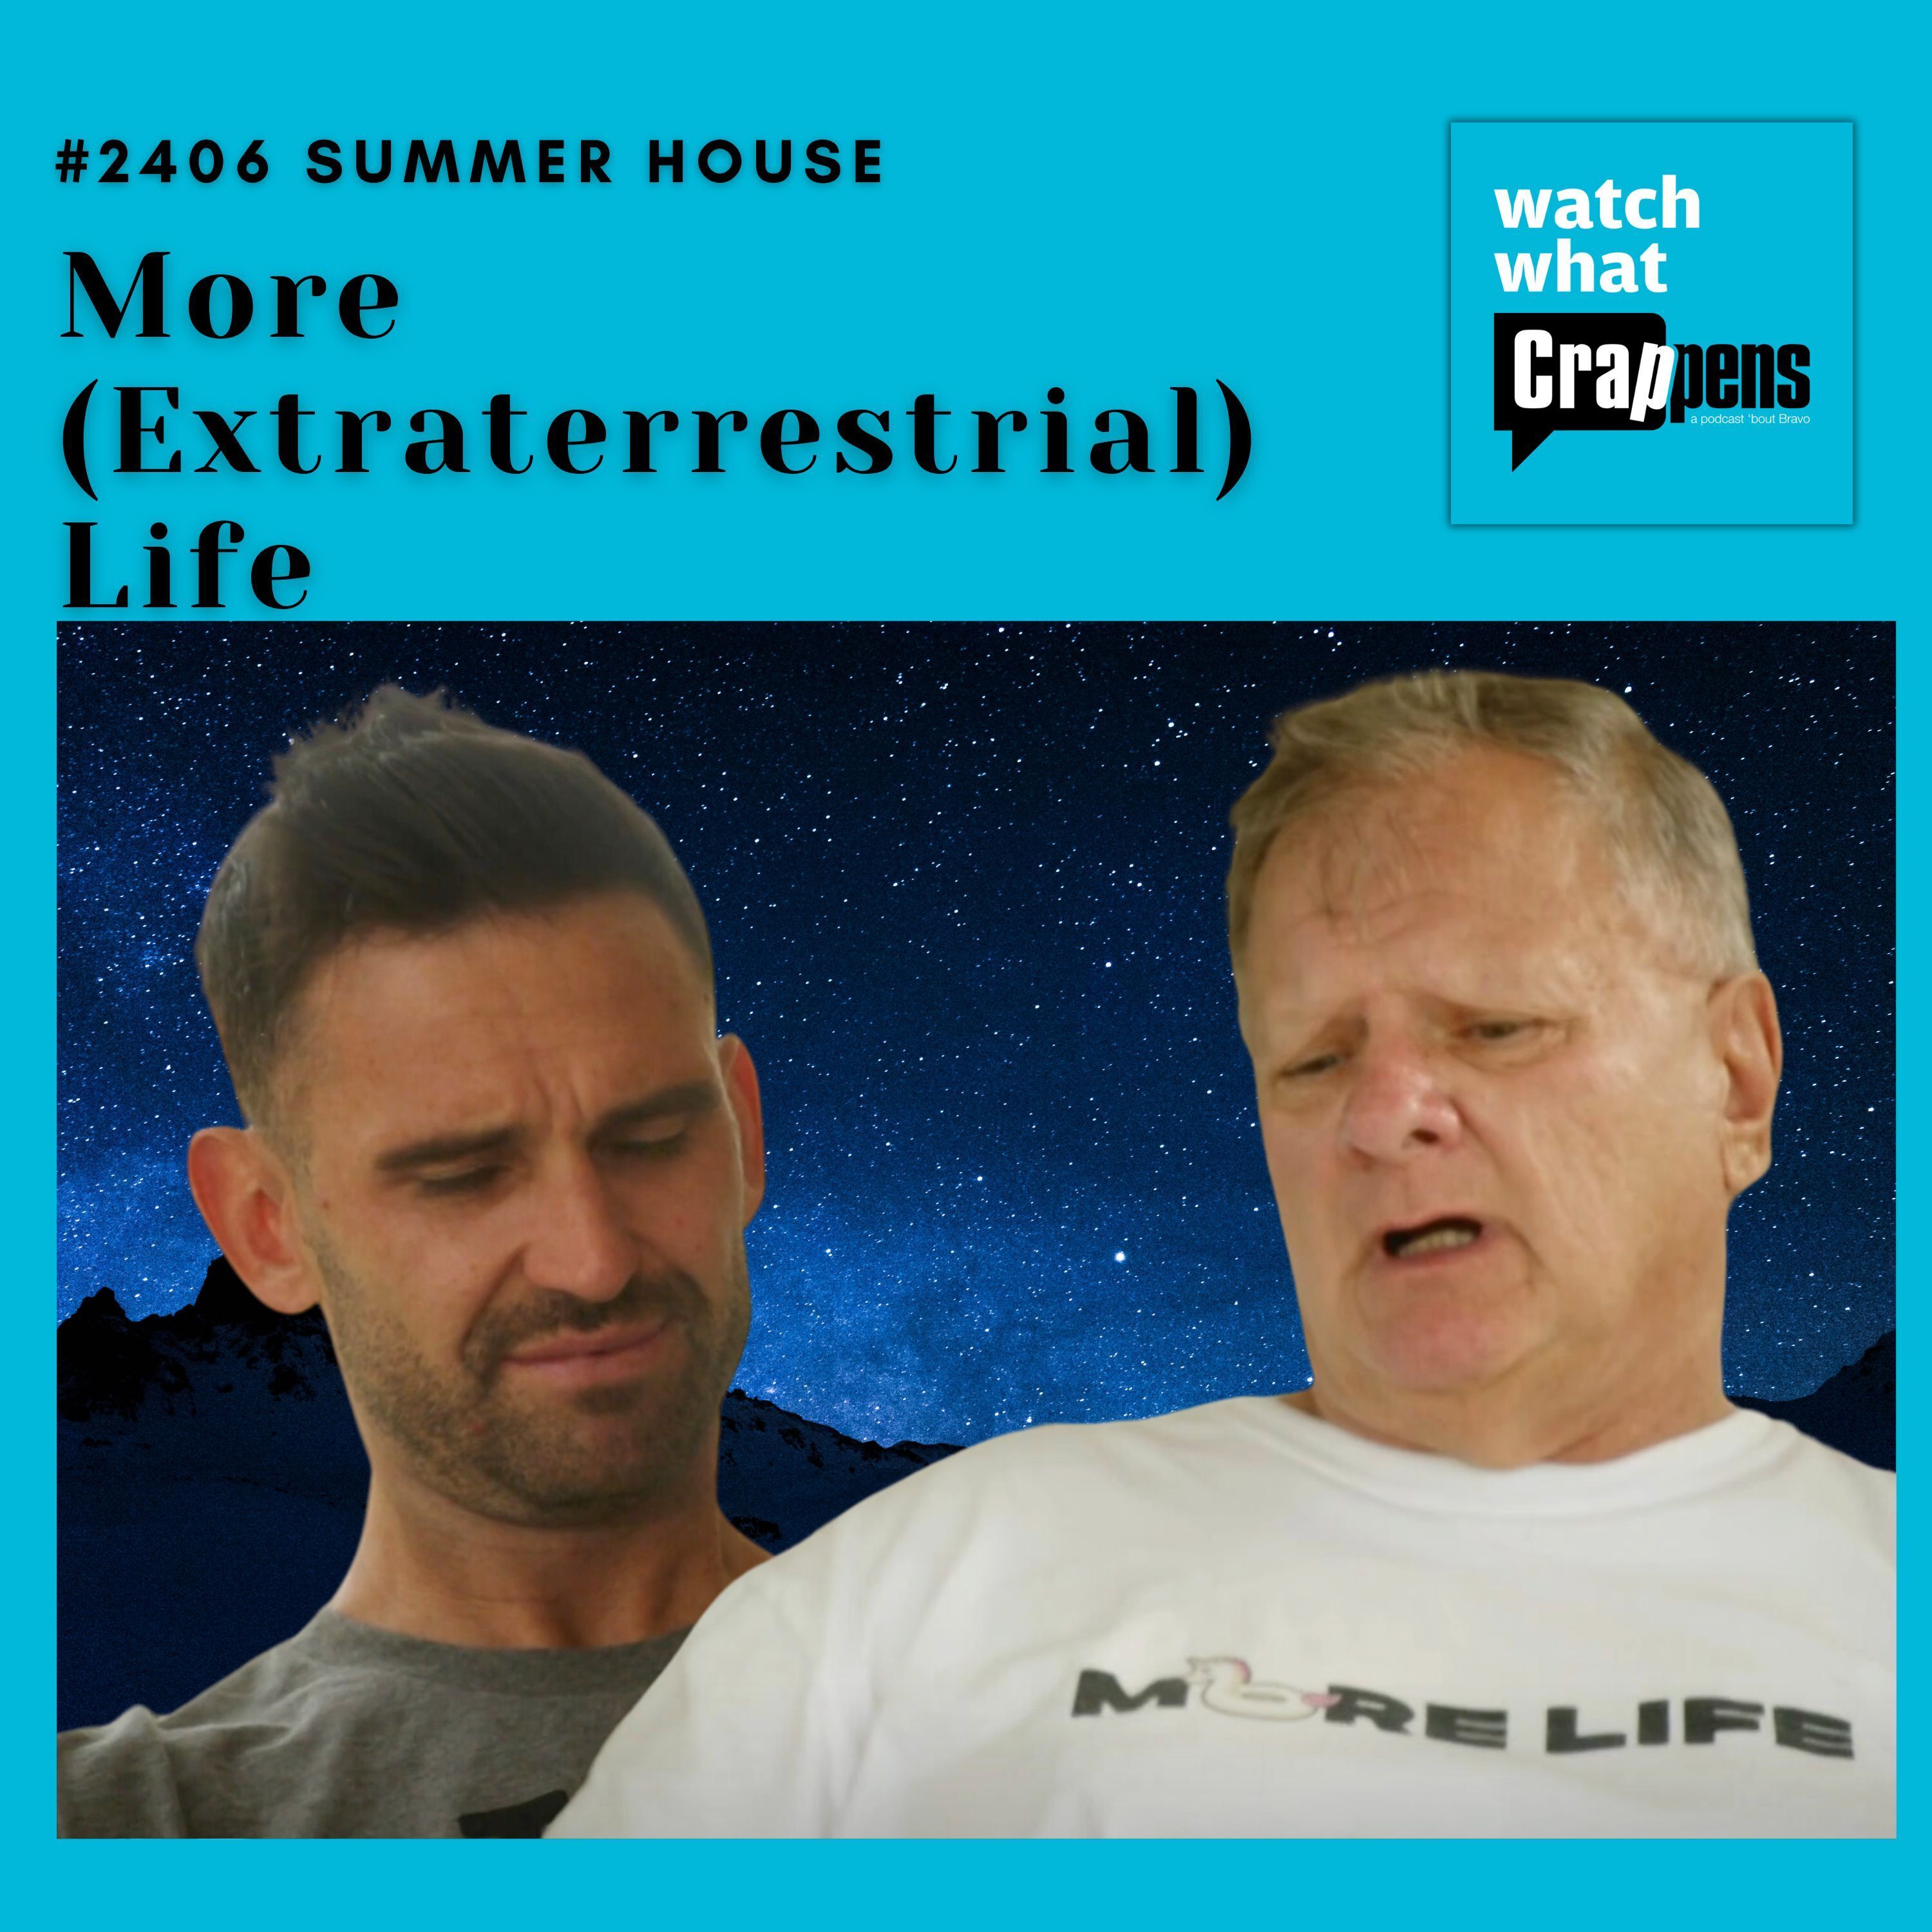 #2406 Summer House: More (Extraterrestrial) Life